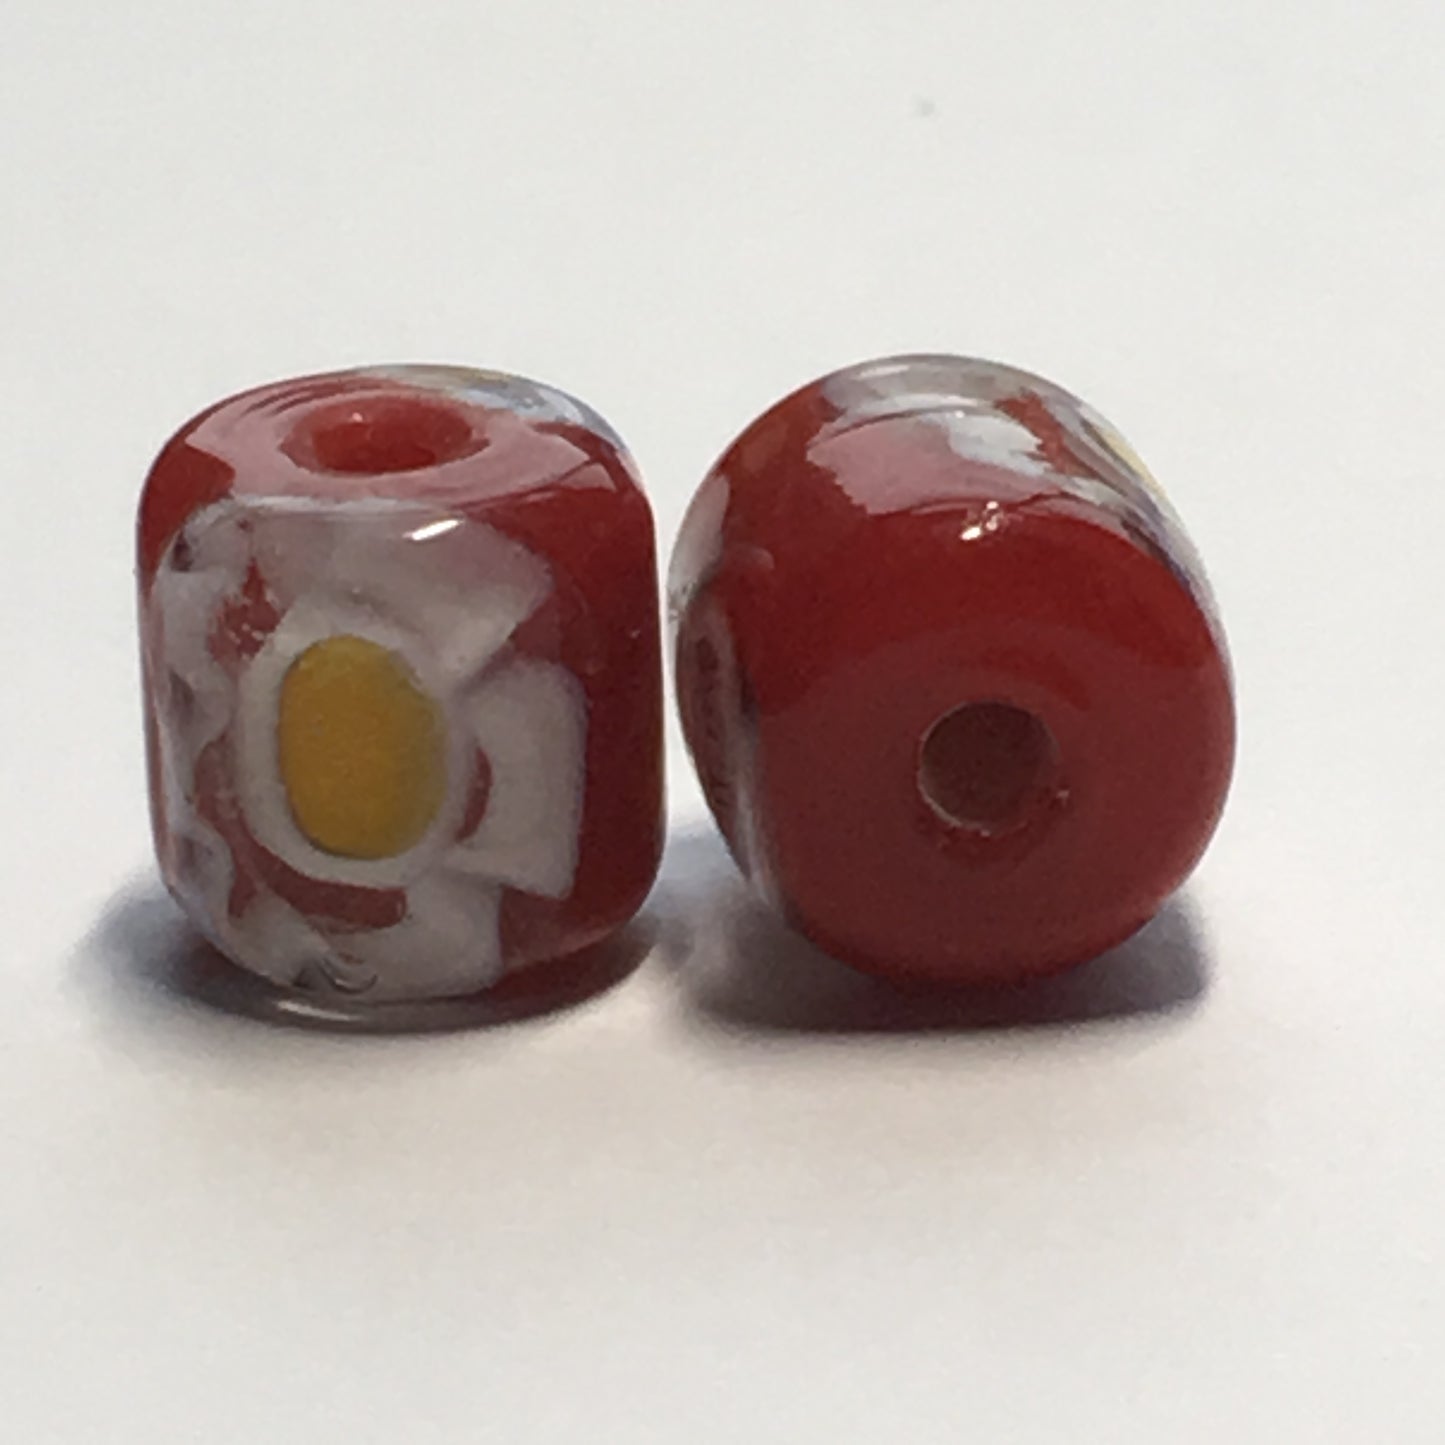 Opaque Red Glass with Yellow Flower Lampwork Glass Barrel Beads, 10 mm x 10 mm, 2 Beads